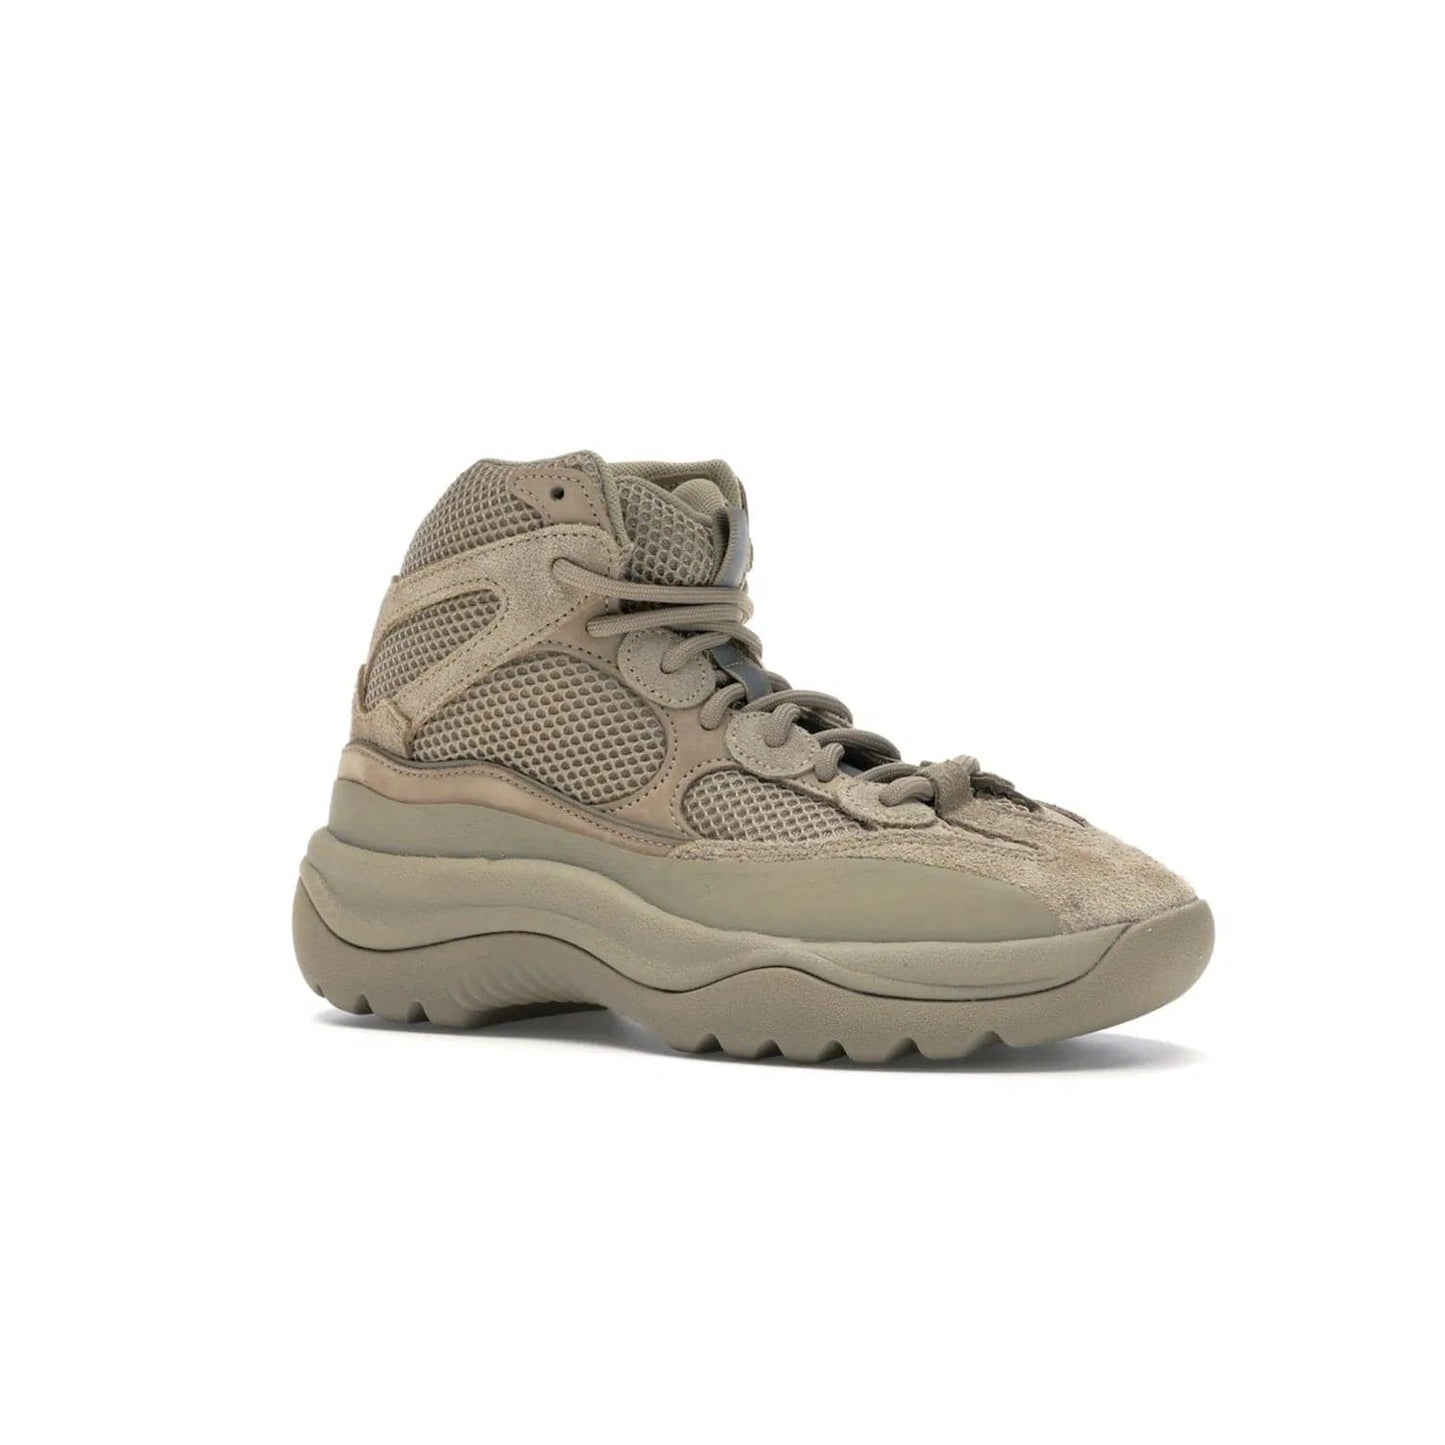 adidas Yeezy Desert Boot Rock - Image 4 - Only at www.BallersClubKickz.com - #
This season, make a fashion statement with the adidas Yeezy Desert Boot Rock. Nubuck and suede upper offers tonal style while the grooved sole provides traction and stability. Get yours in April 2019.